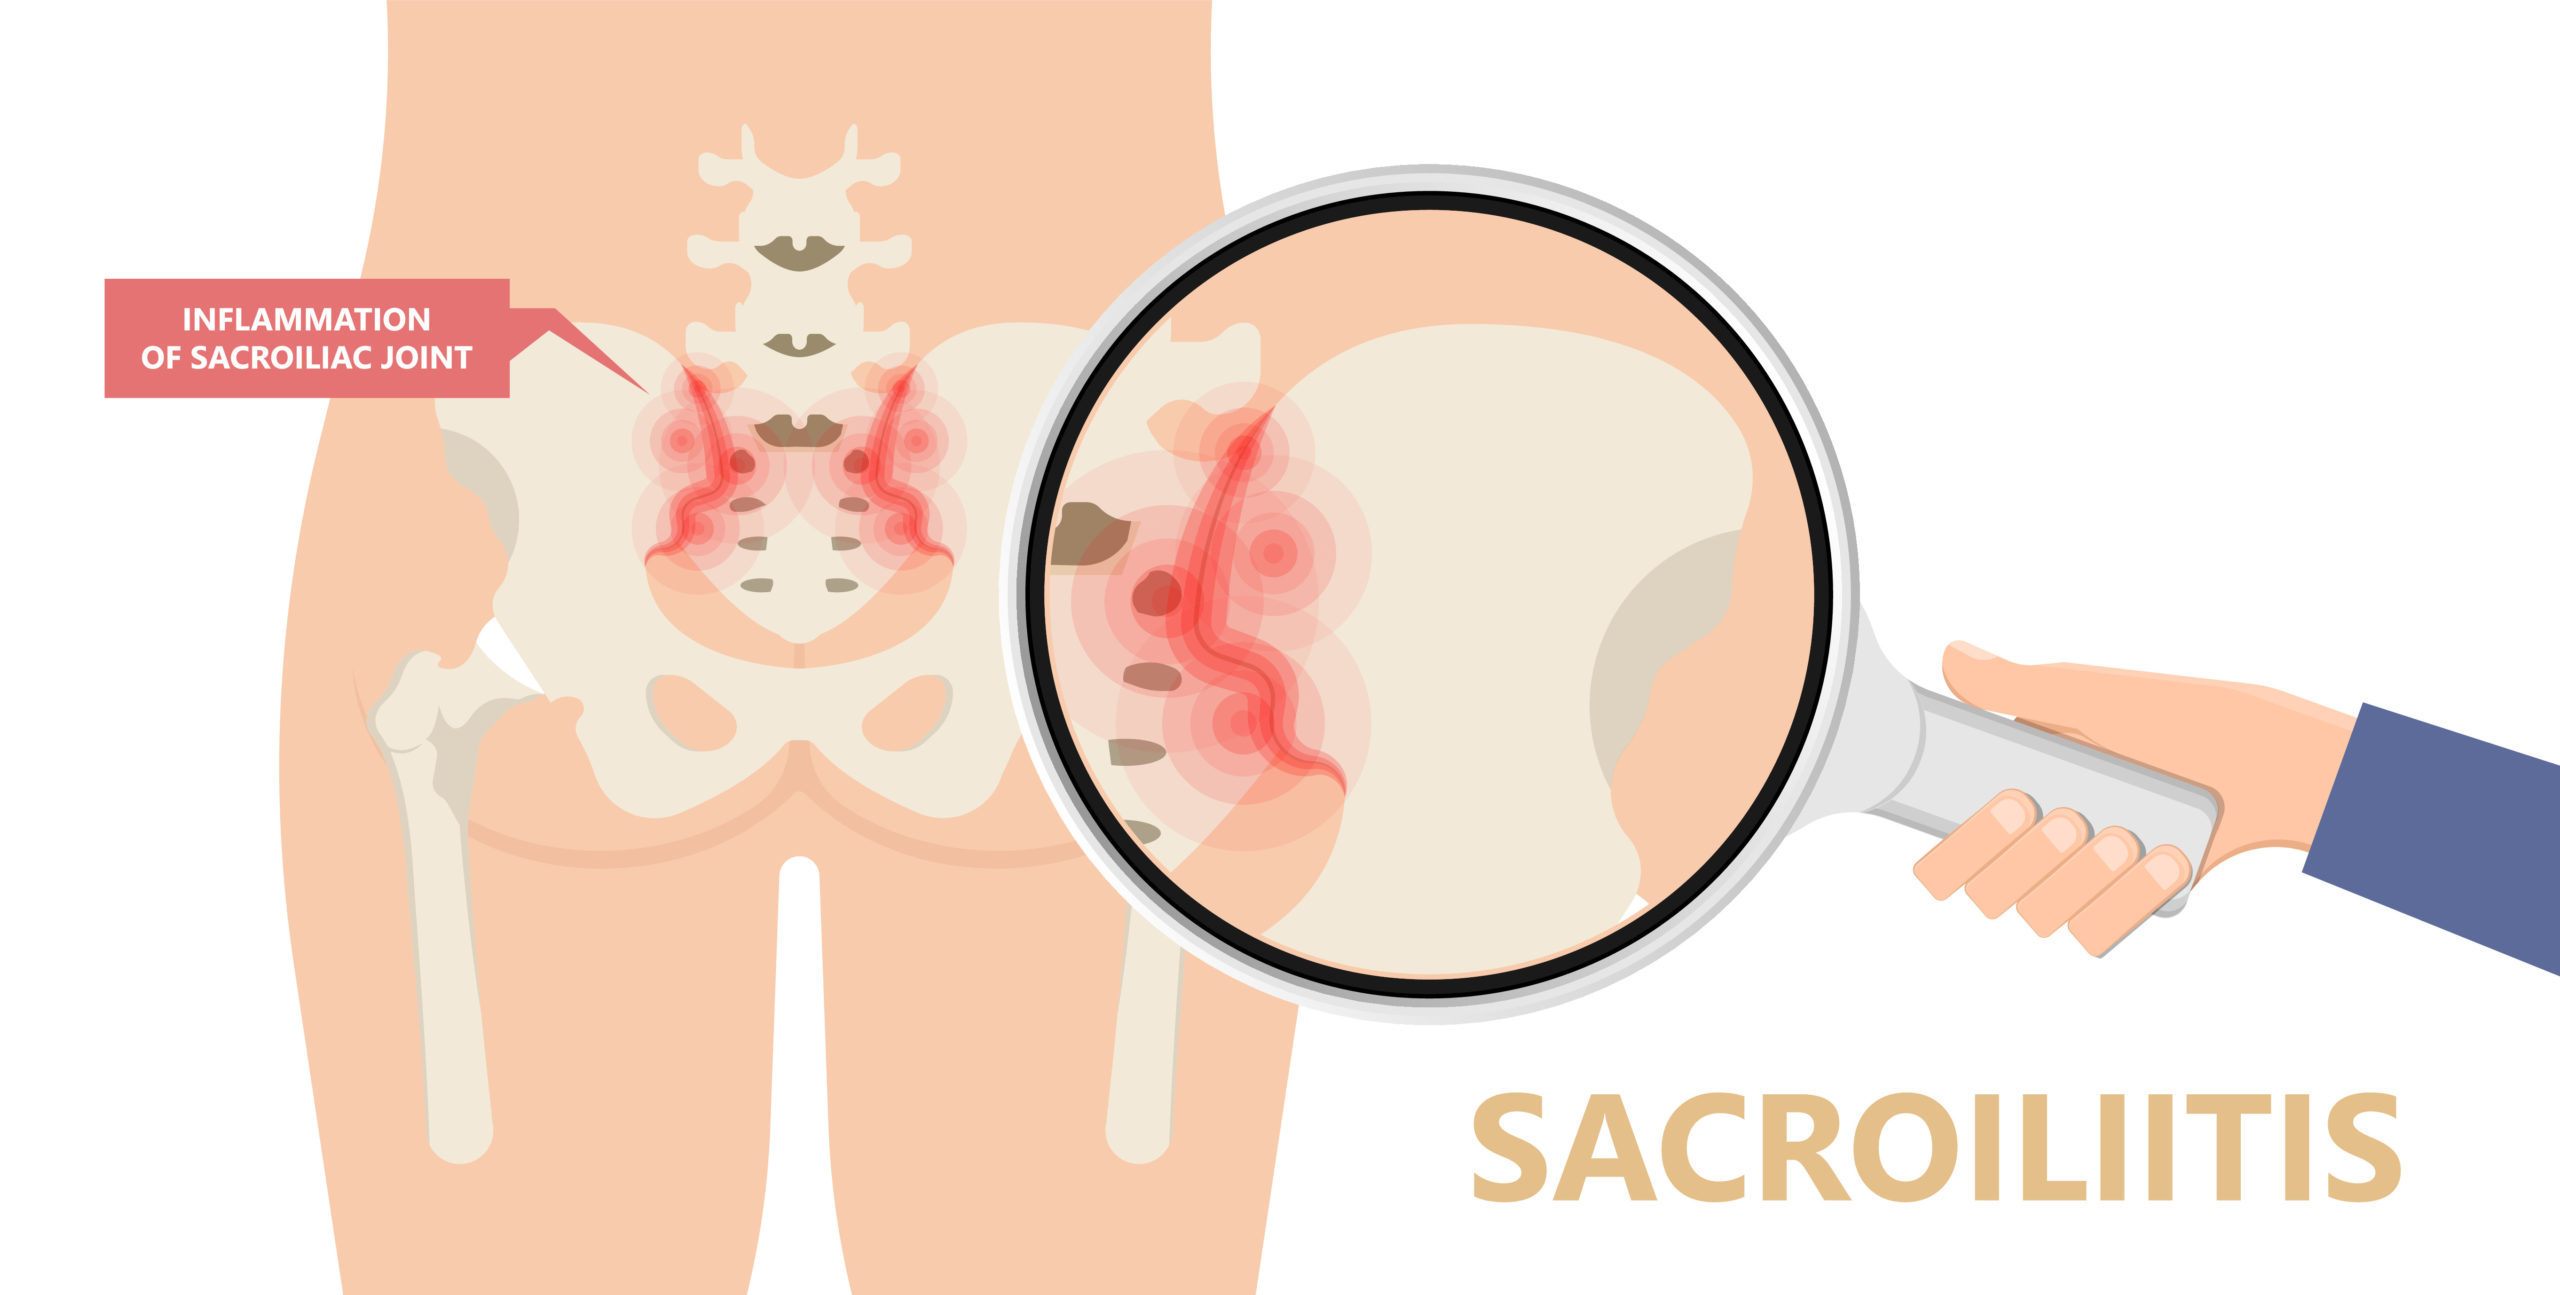 Sacroiliitis pain of sacroiliac joints and hips lupus legs physical exam ulcerative colitis infection swelling ligaments breakdown psoriasis Trauma Obesity Gout